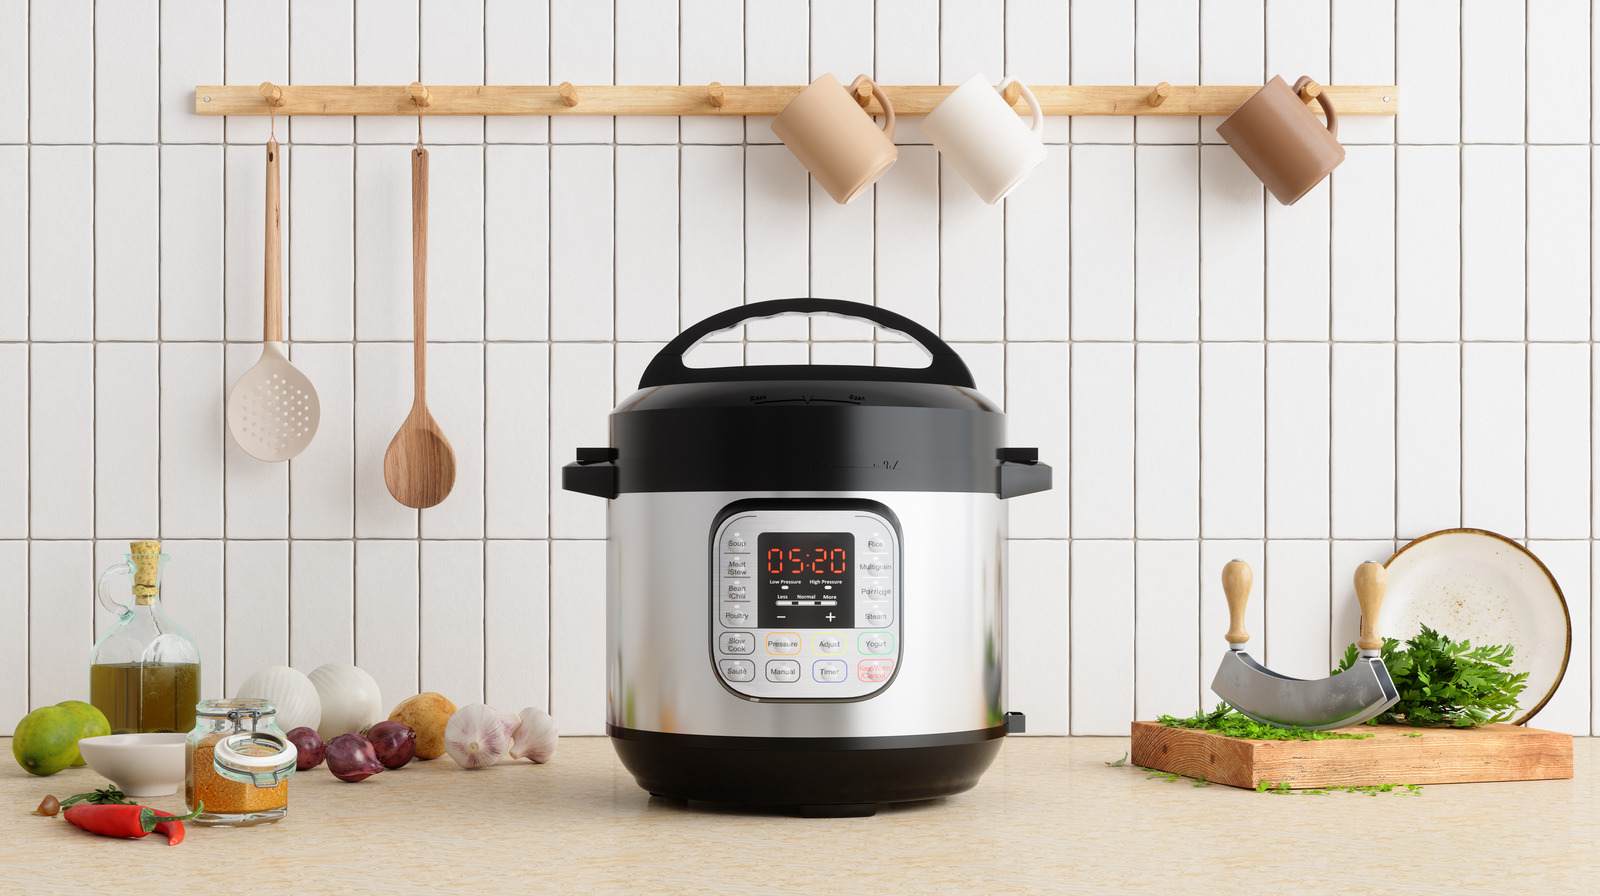 https://www.tastingtable.com/img/gallery/16-instant-pot-hacks-you-need-to-start-using/l-intro-1698851792.jpg